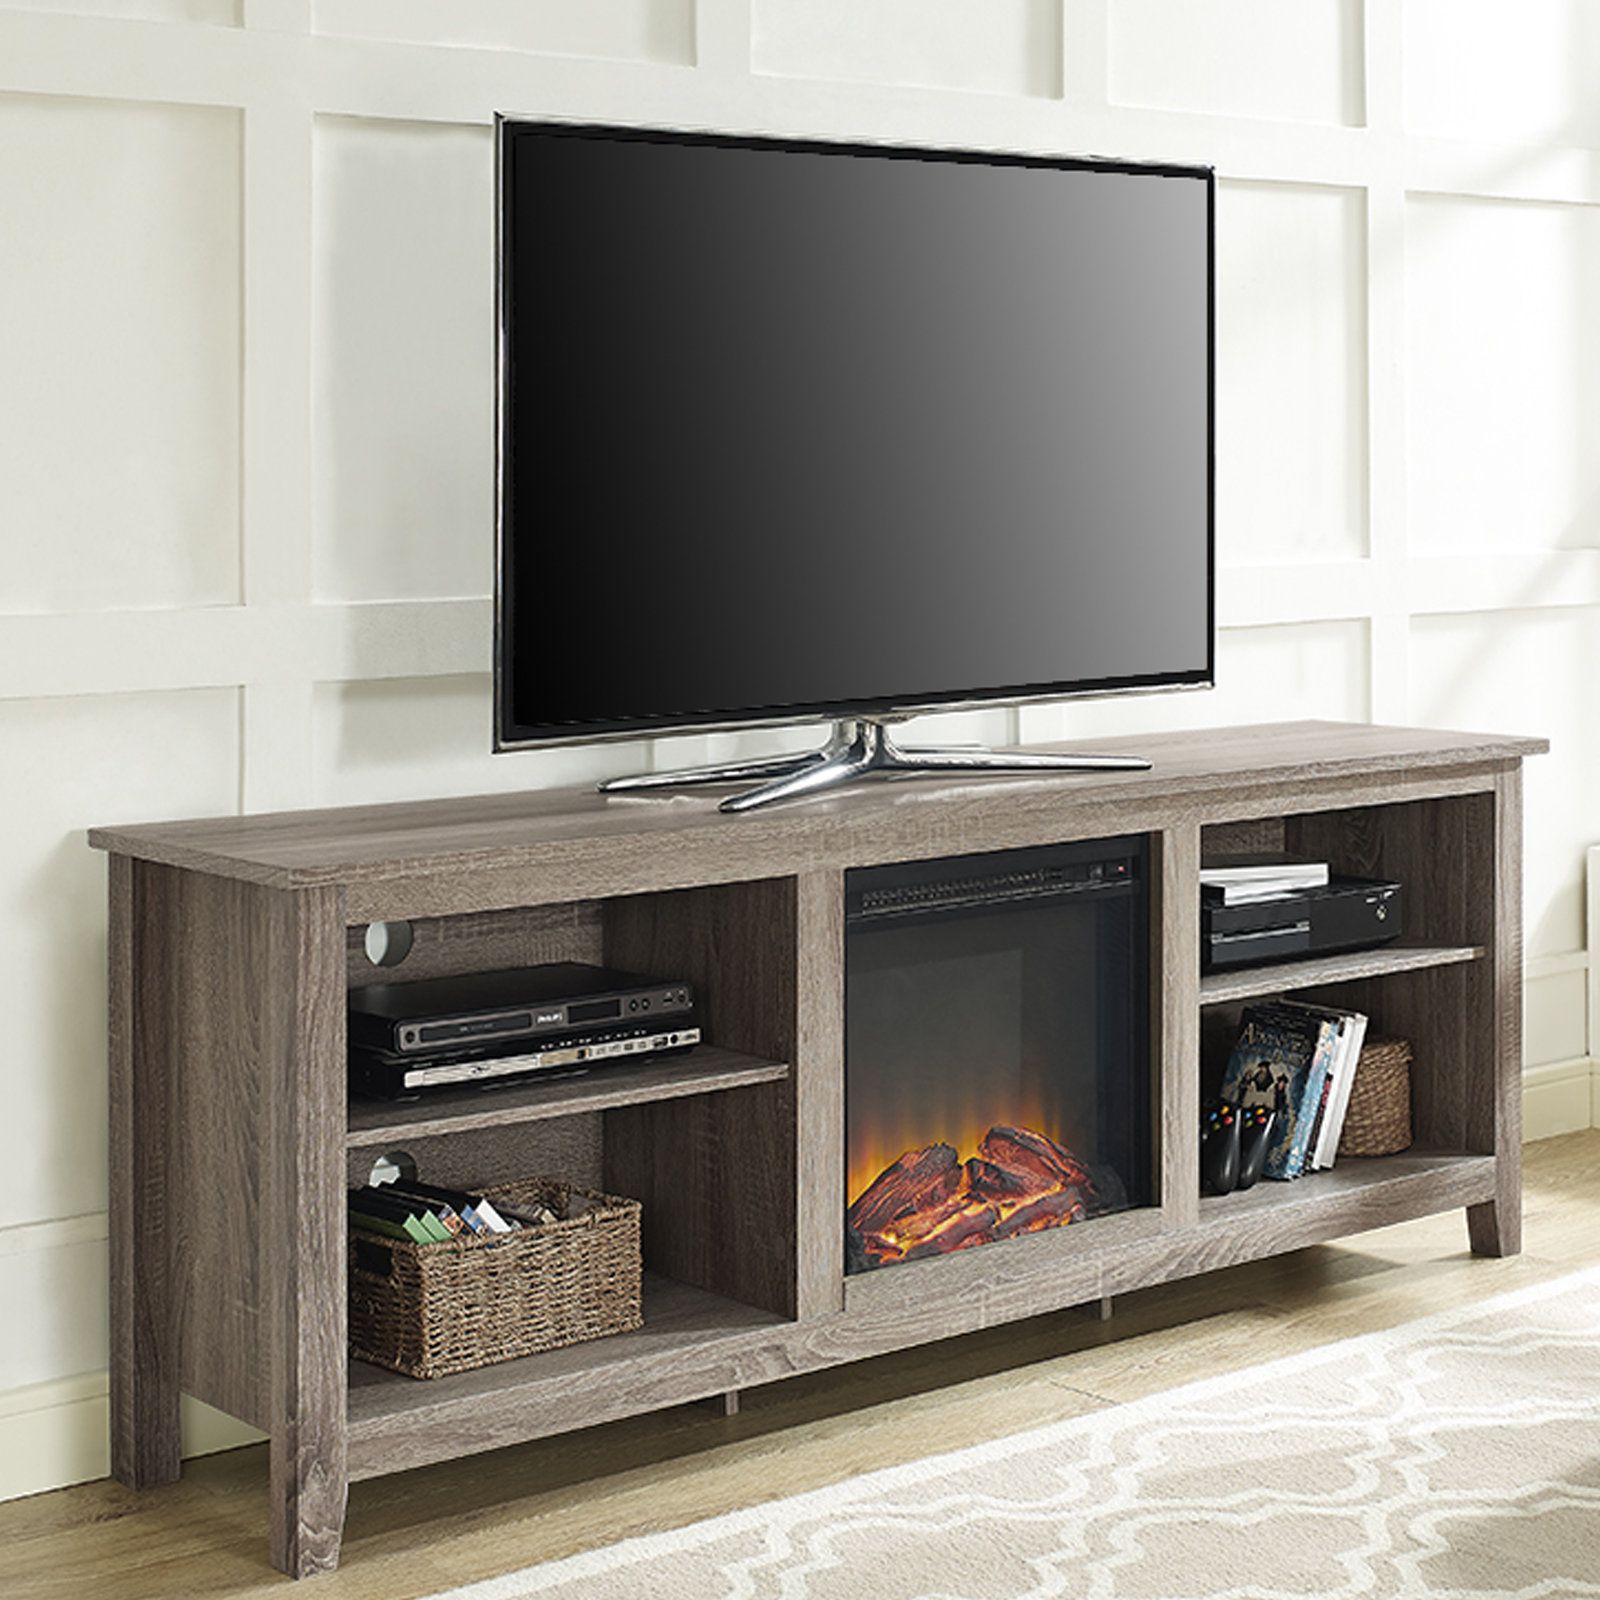 Fireplace Tv Stands & Entertainment Centers You'll Love | Wayfair (View 25 of 30)